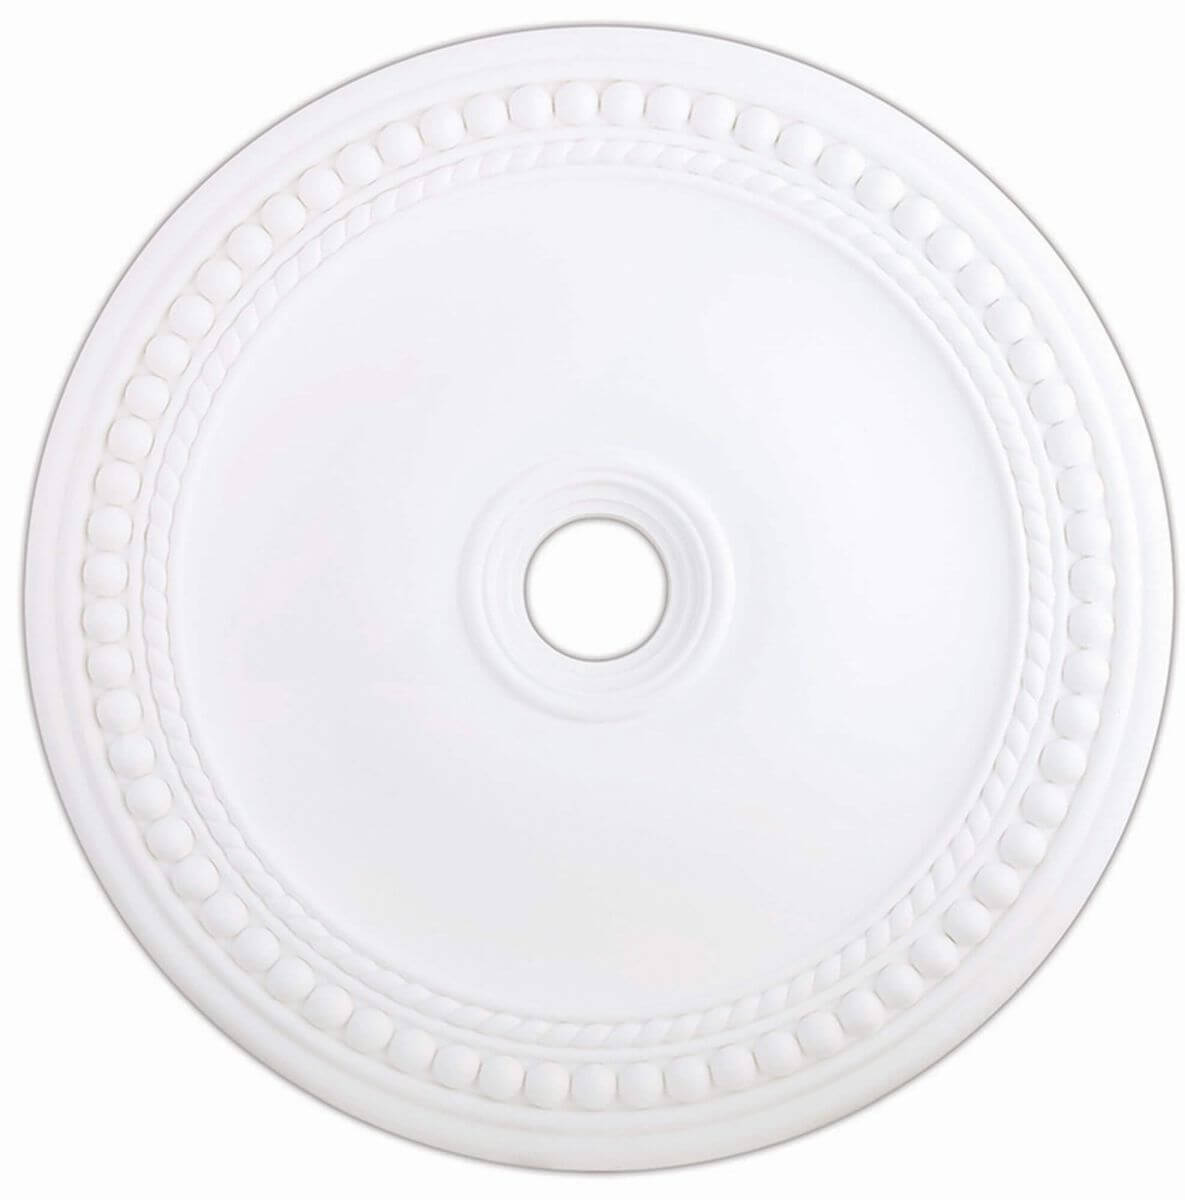 36 X 3 inch Ceiling Medallion In White - 102749